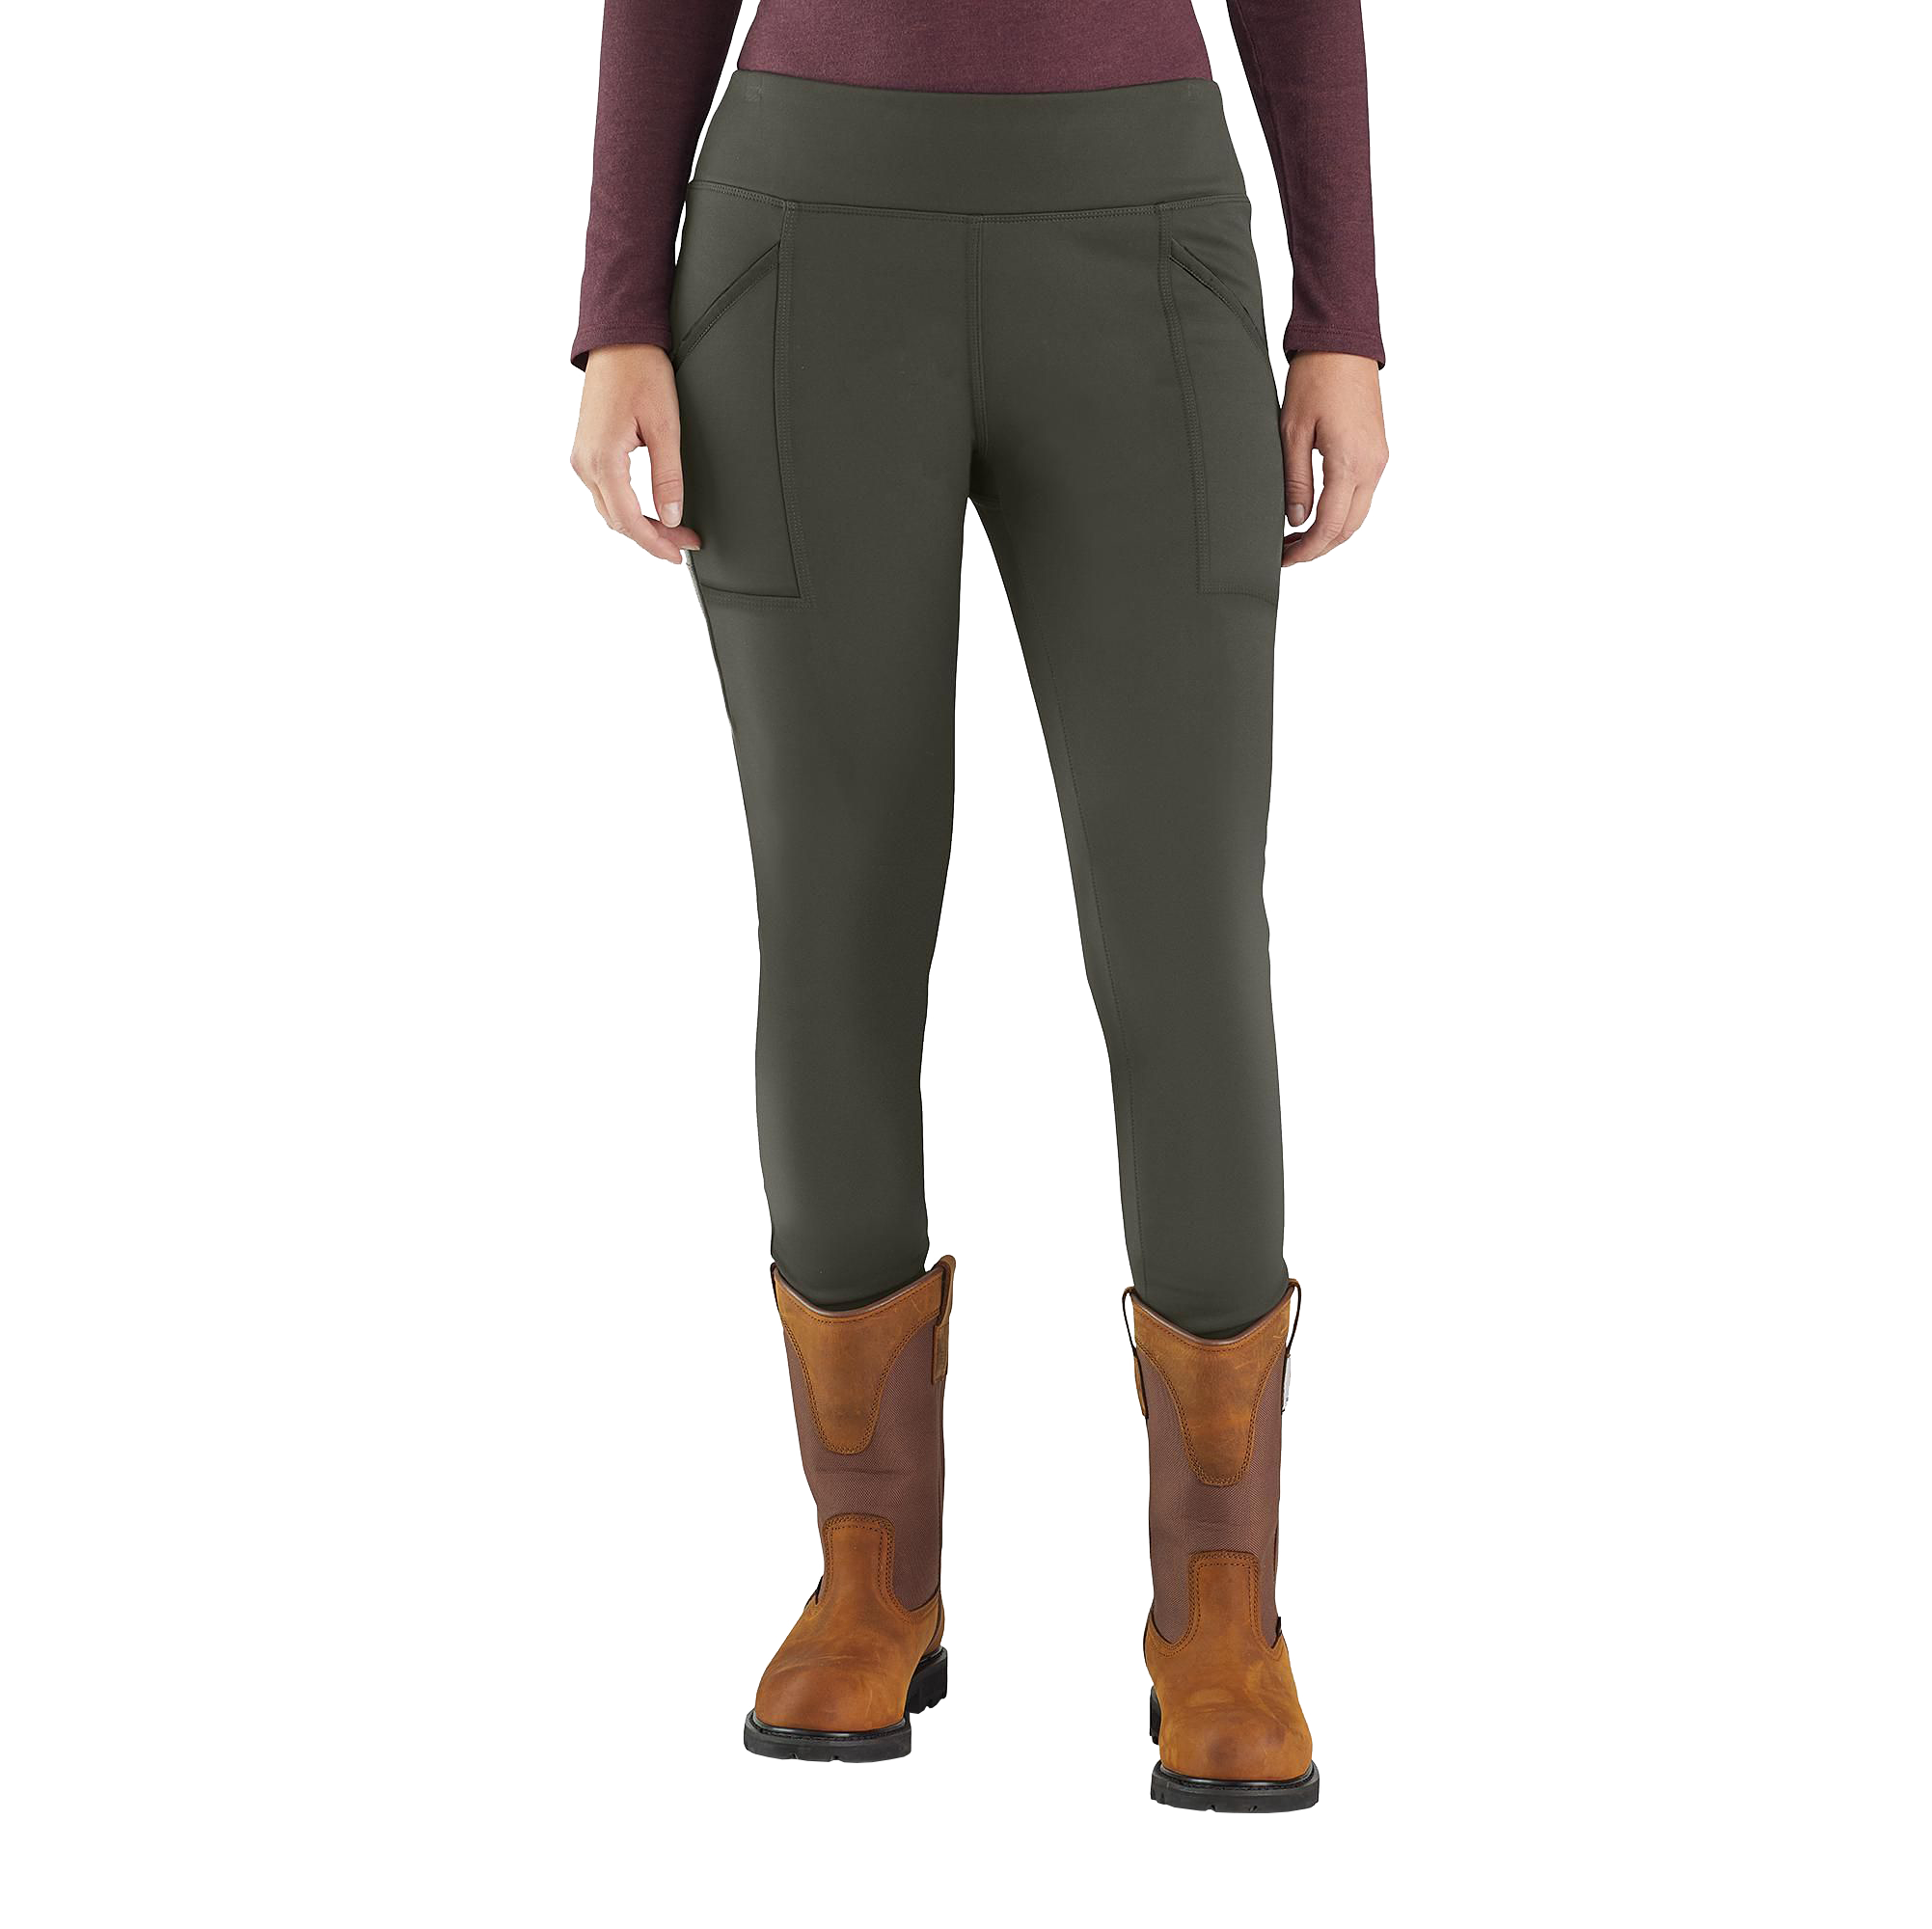 Carhartt Force Fit Heavyweight Lined Leggings for Ladies